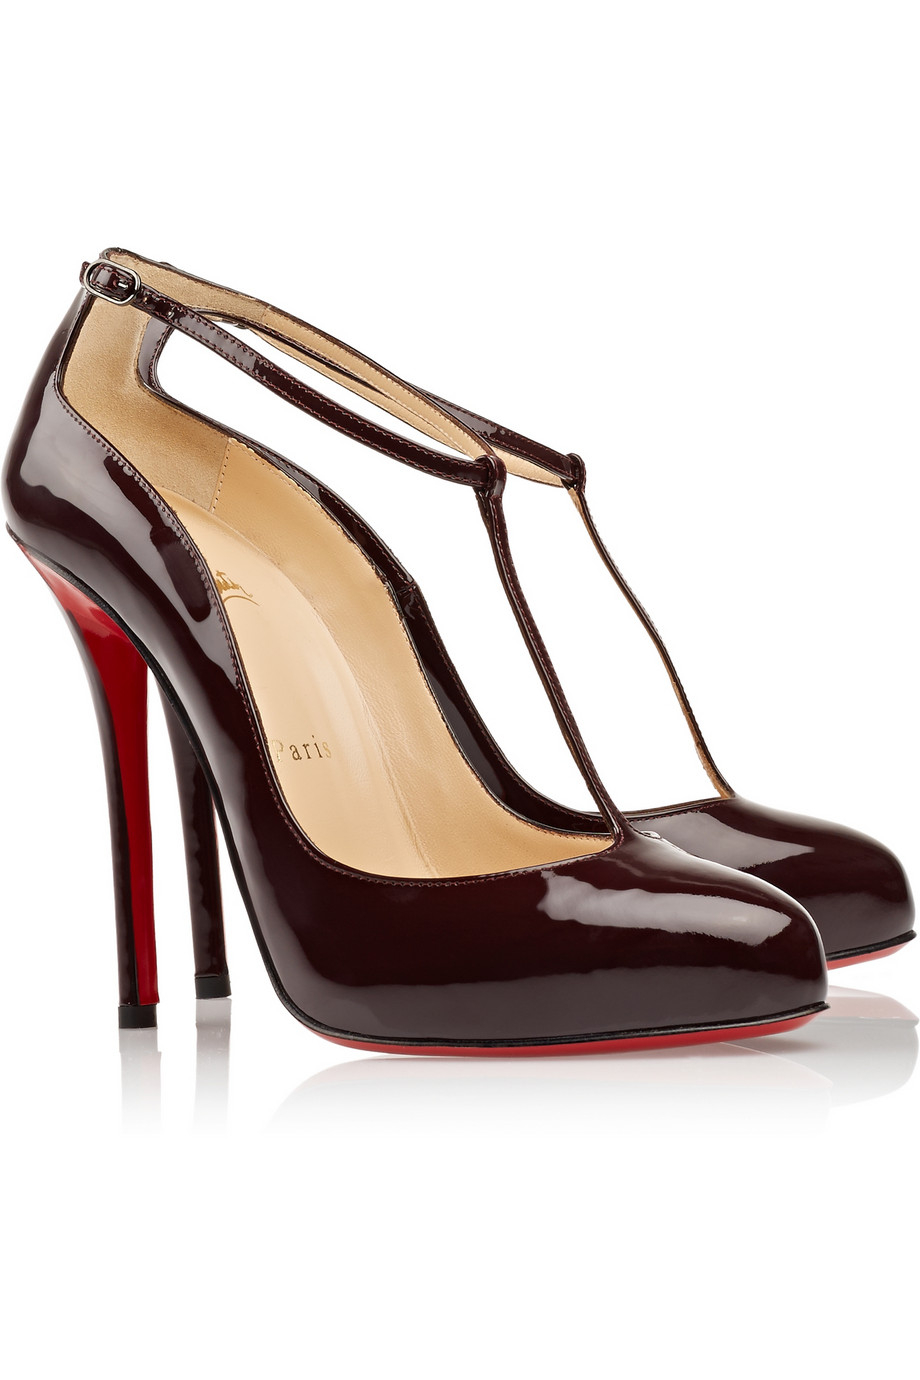 Lyst - Christian Louboutin Ditassima 120 Patent-Leather T-Bar Pumps in Red